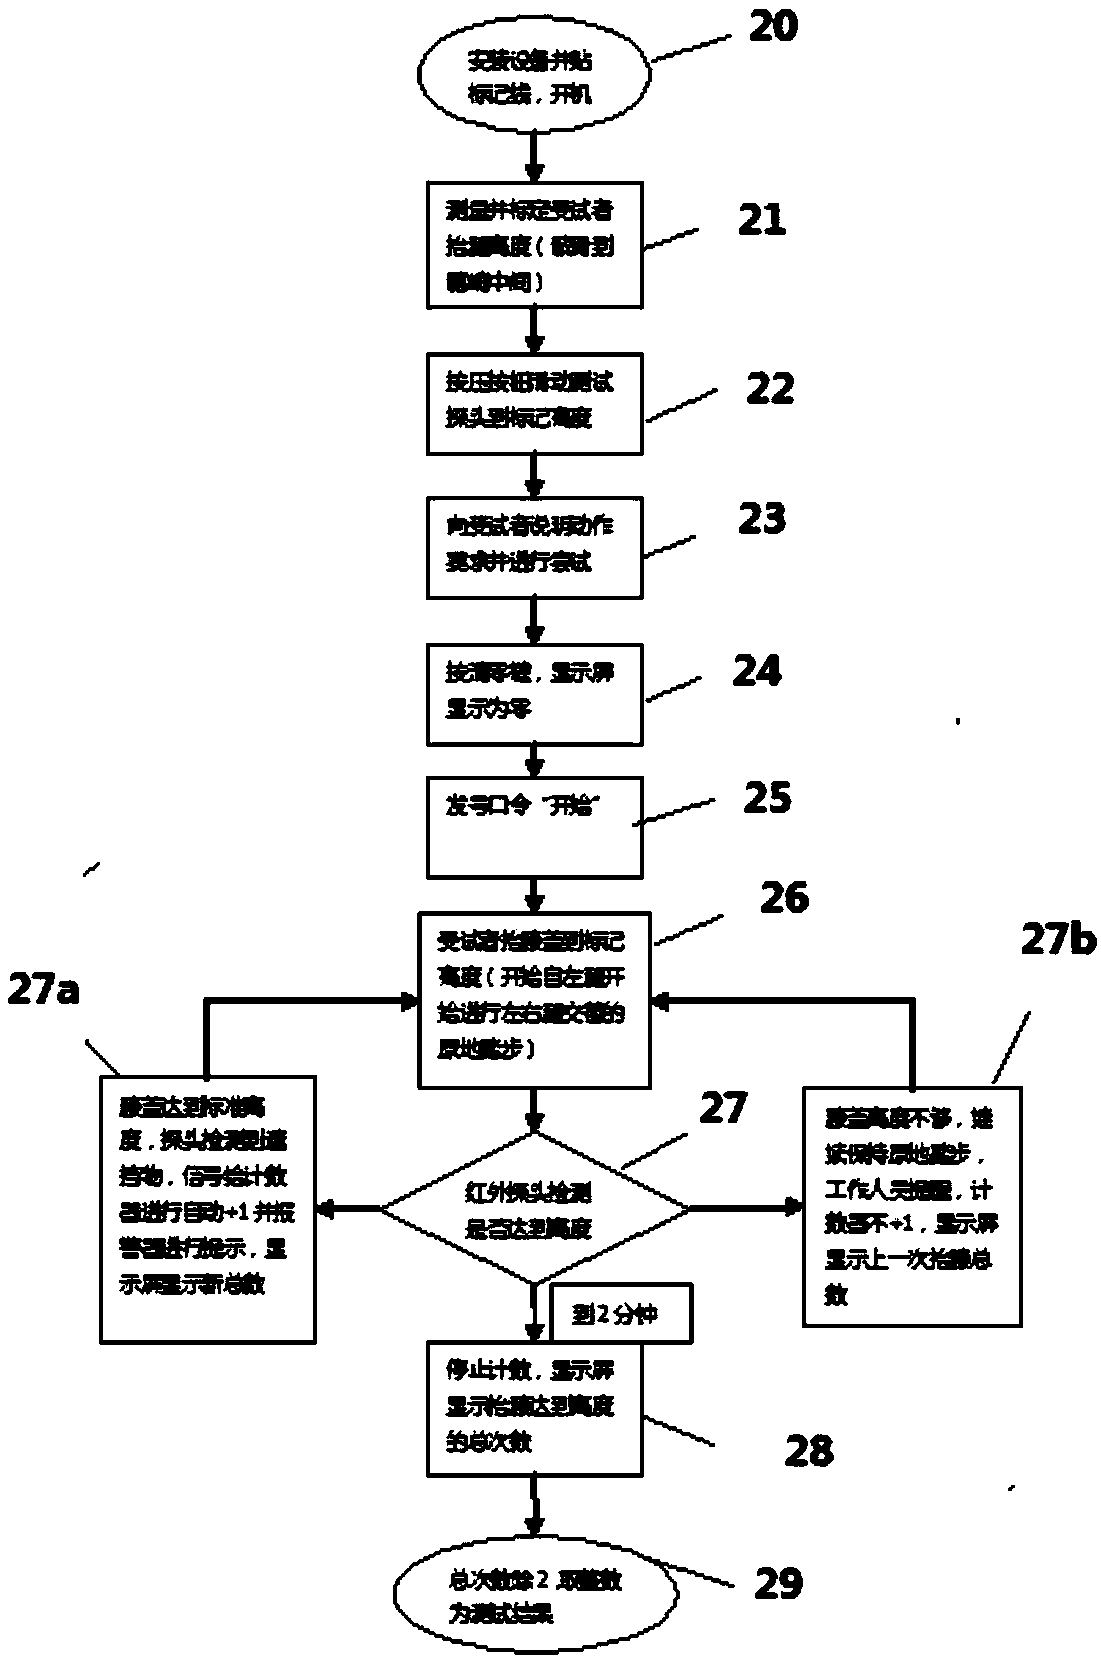 Method and device for physical fitness testing